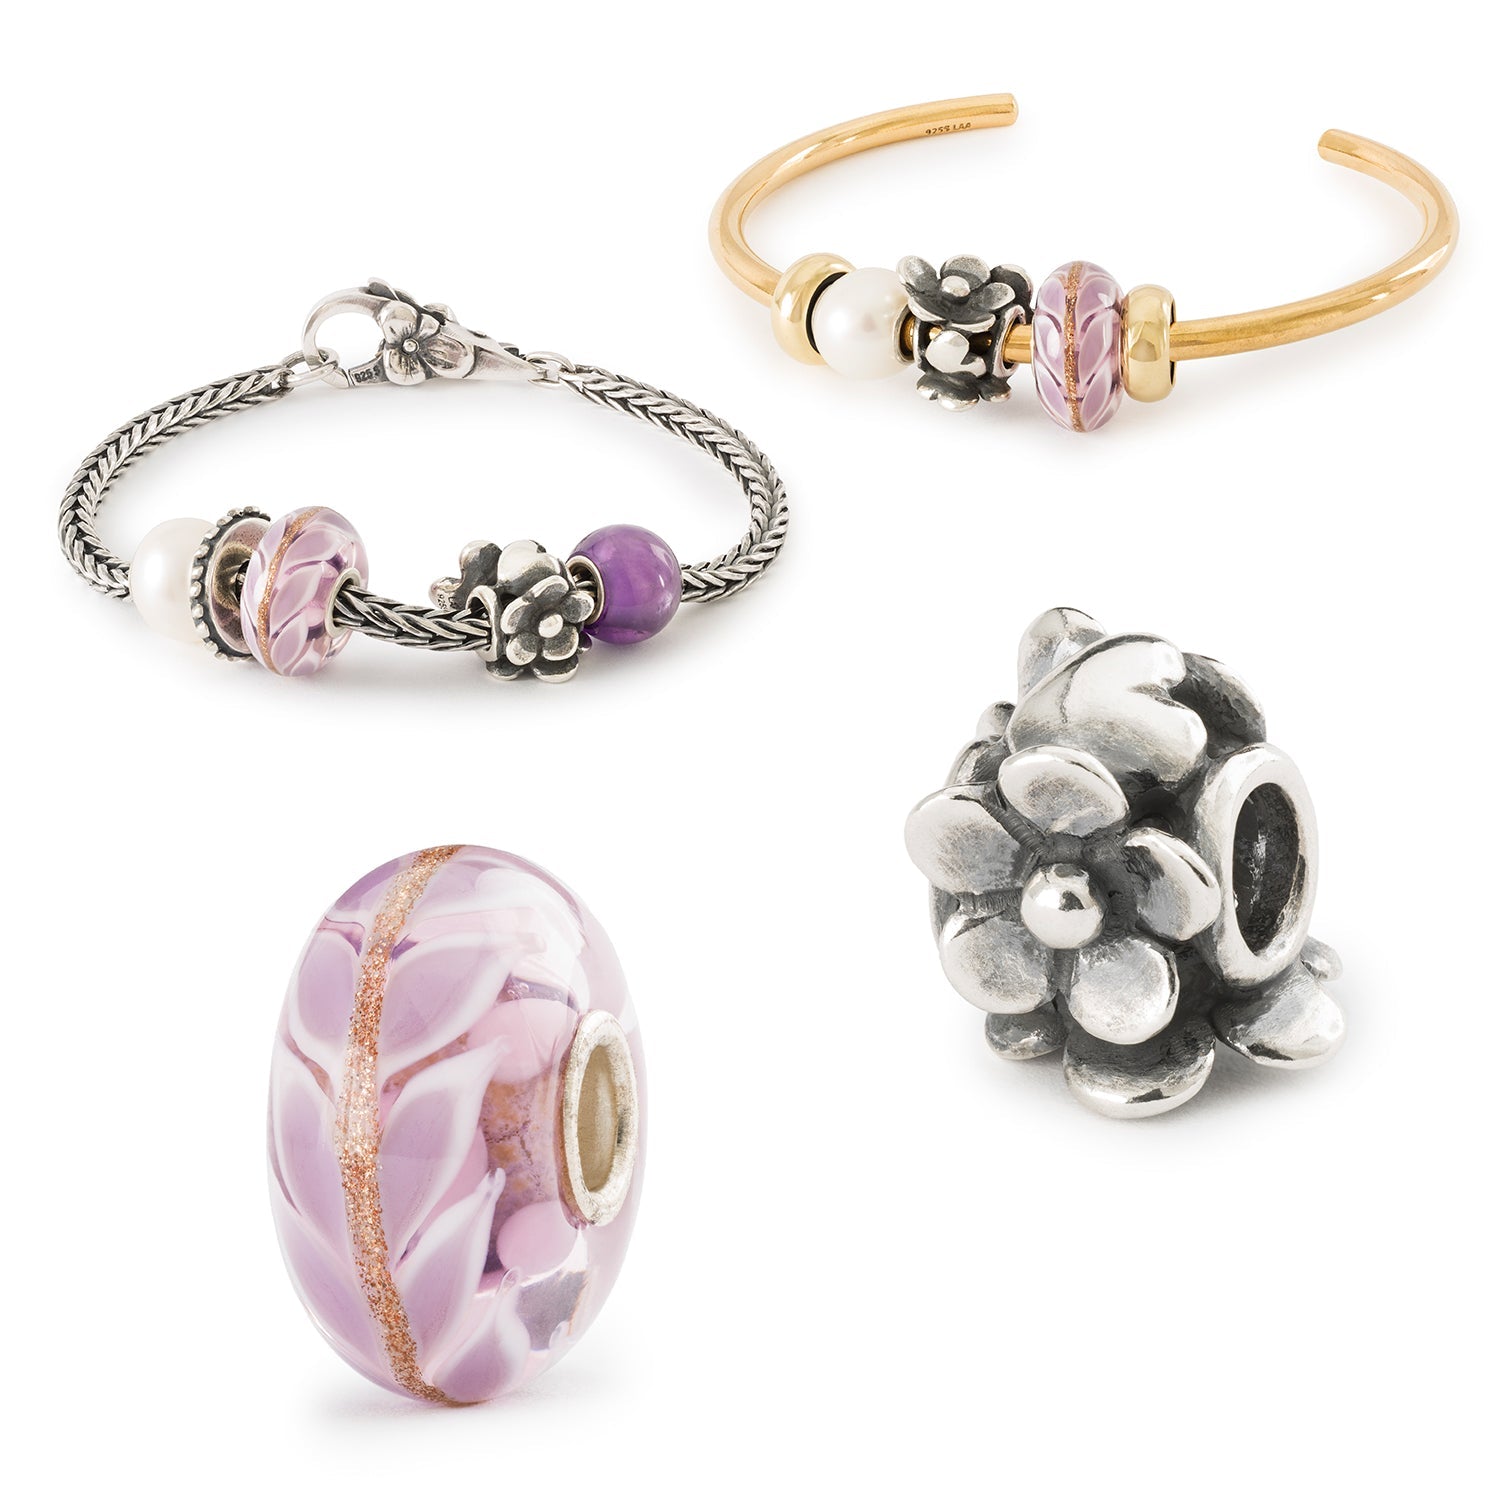 Gallery with Trollbeads gift ideas for Mother’s Day, Lavender Love Bead & Heartfelt Bloom Bead